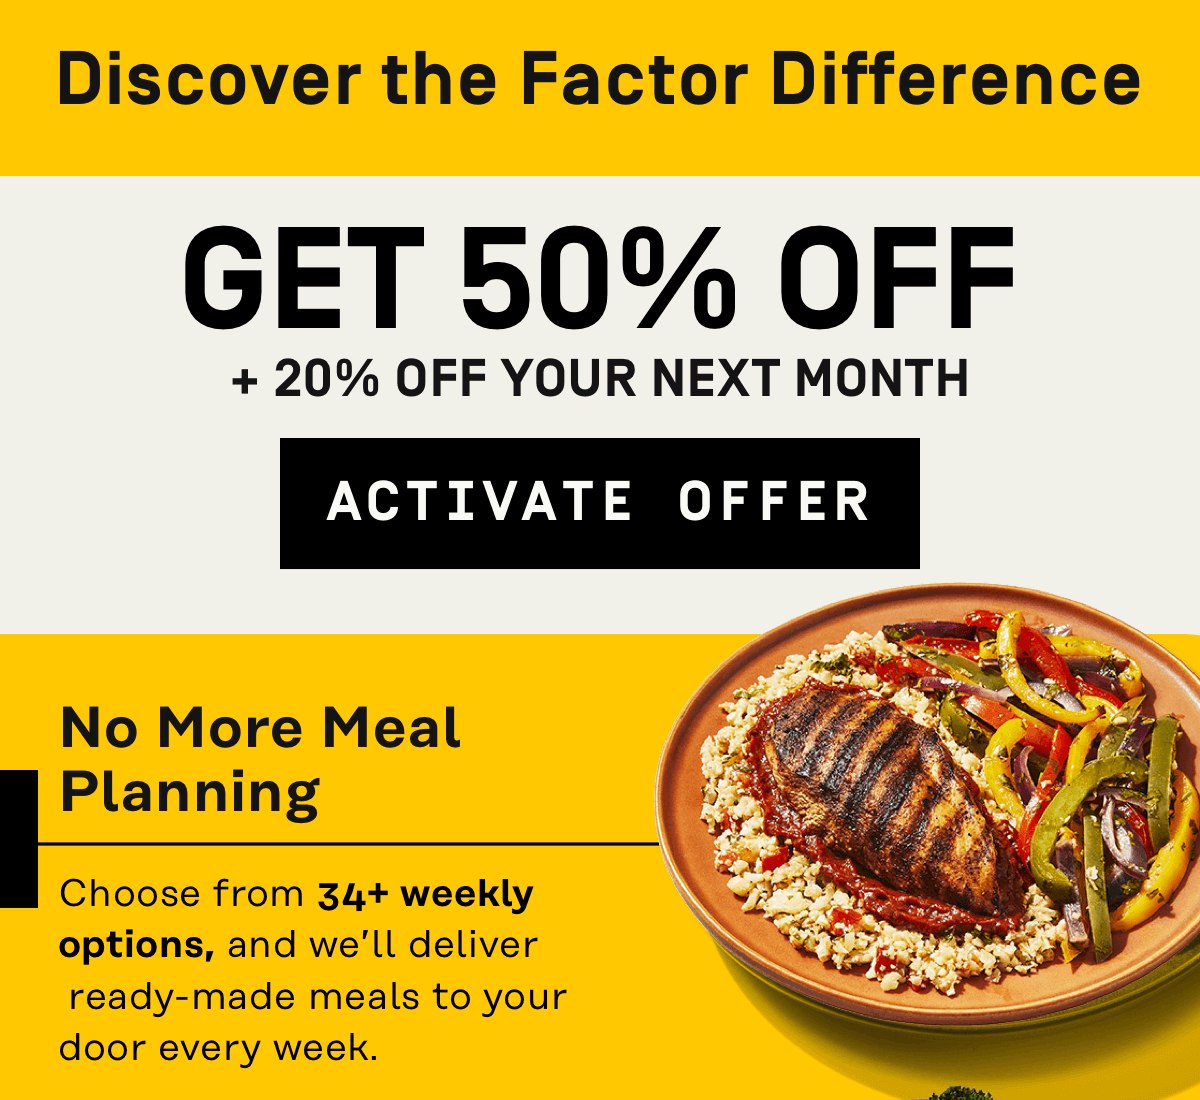 Discover the Factor Difference 50% Off + 20% Off your next month | Activate Offer